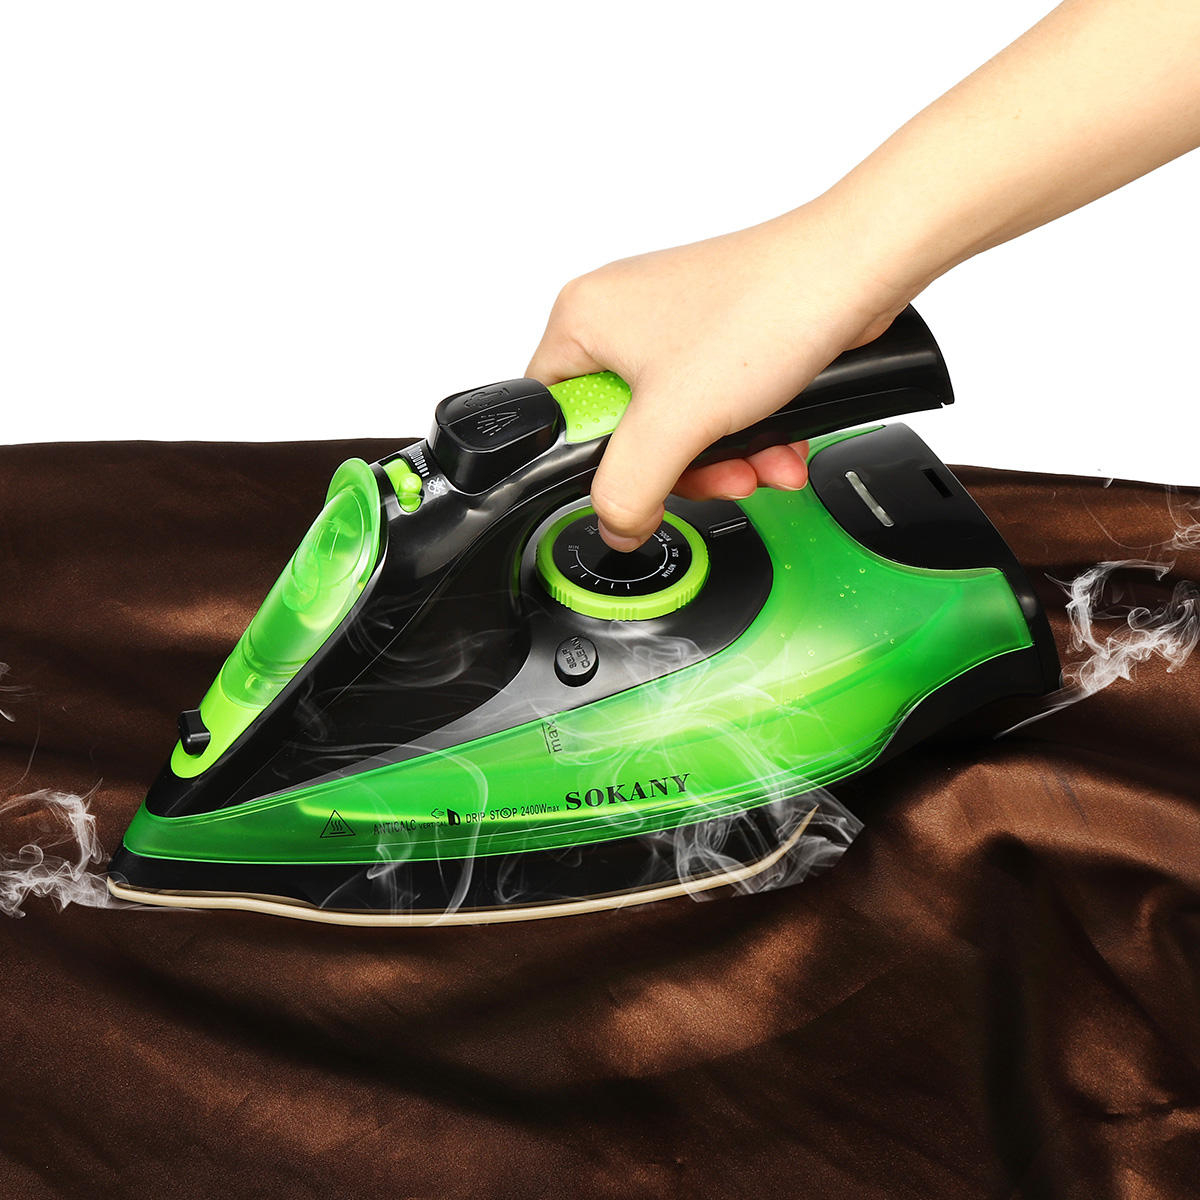 2400w 220v Cordless Steam Iron Multifunction Clothes Docking Station Dry Ironing Industry for size 1200 X 1200